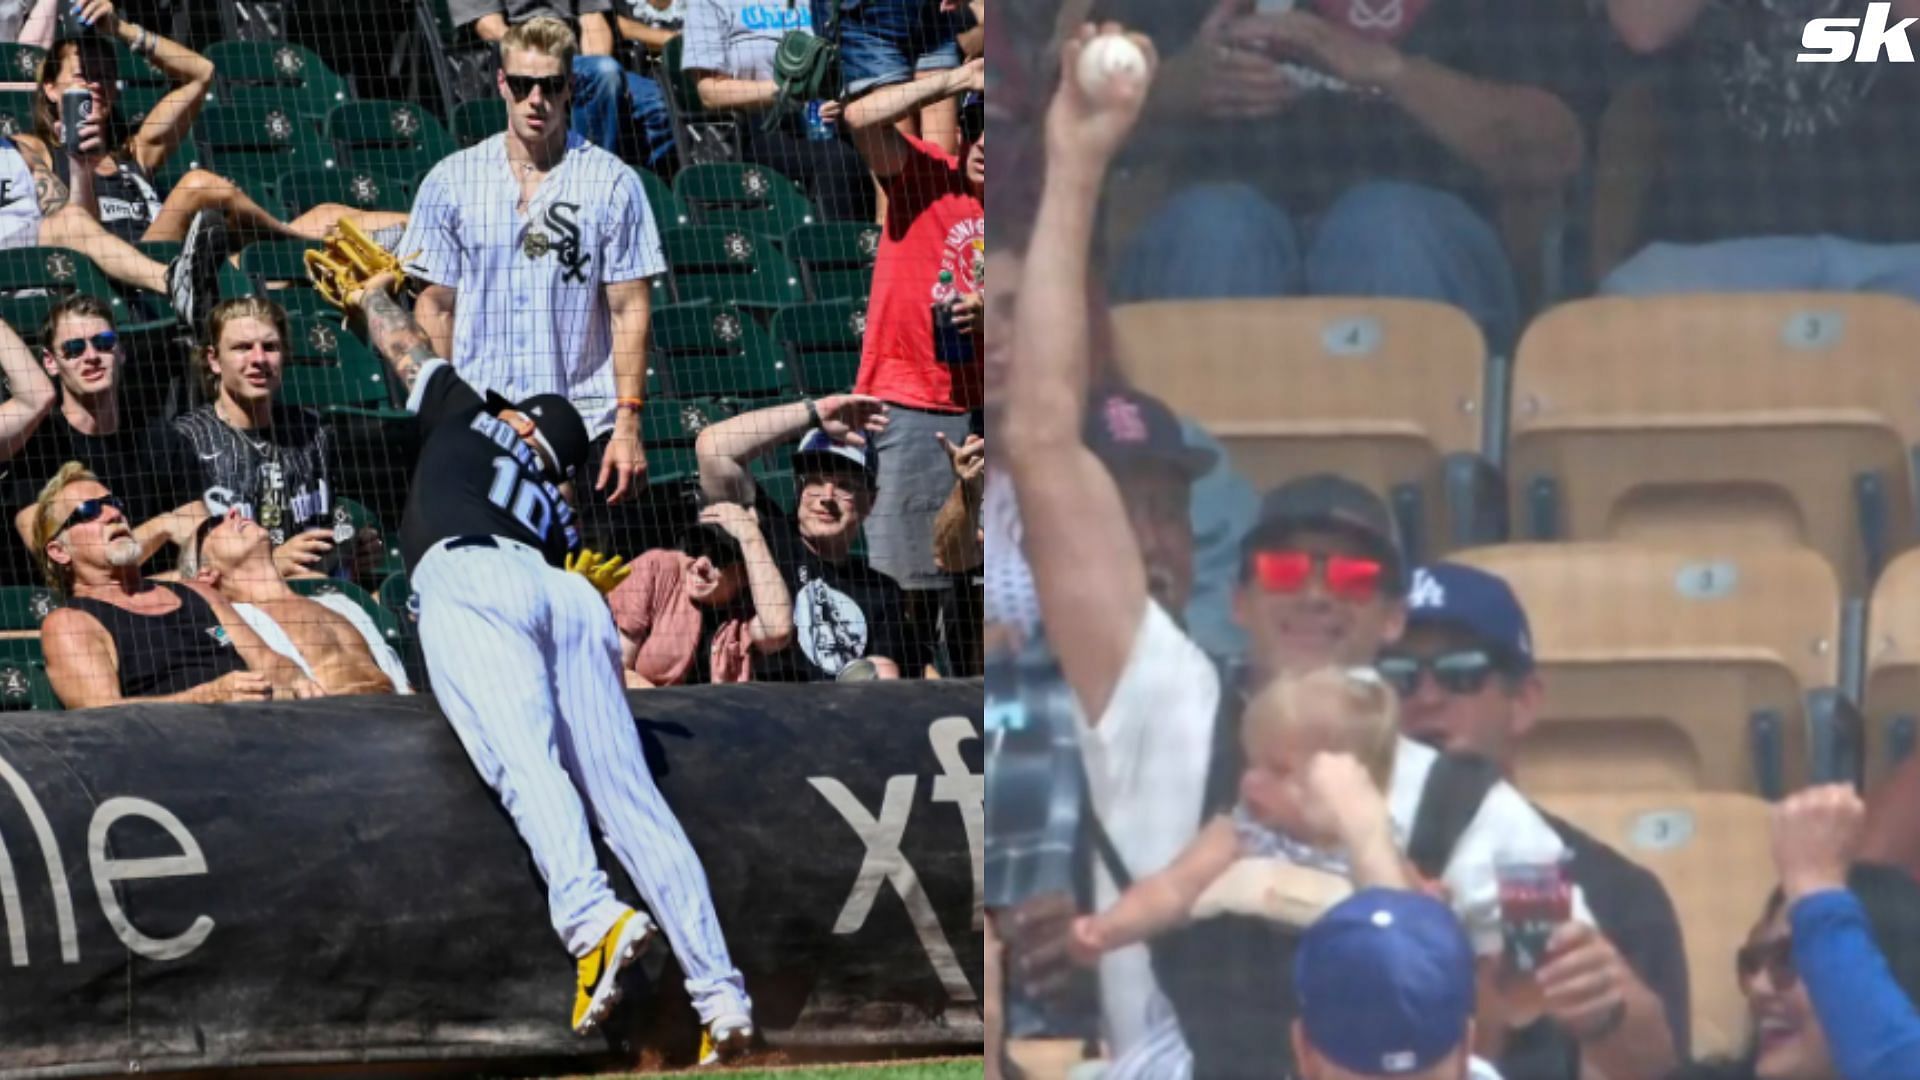 Pictures of people catching the ball